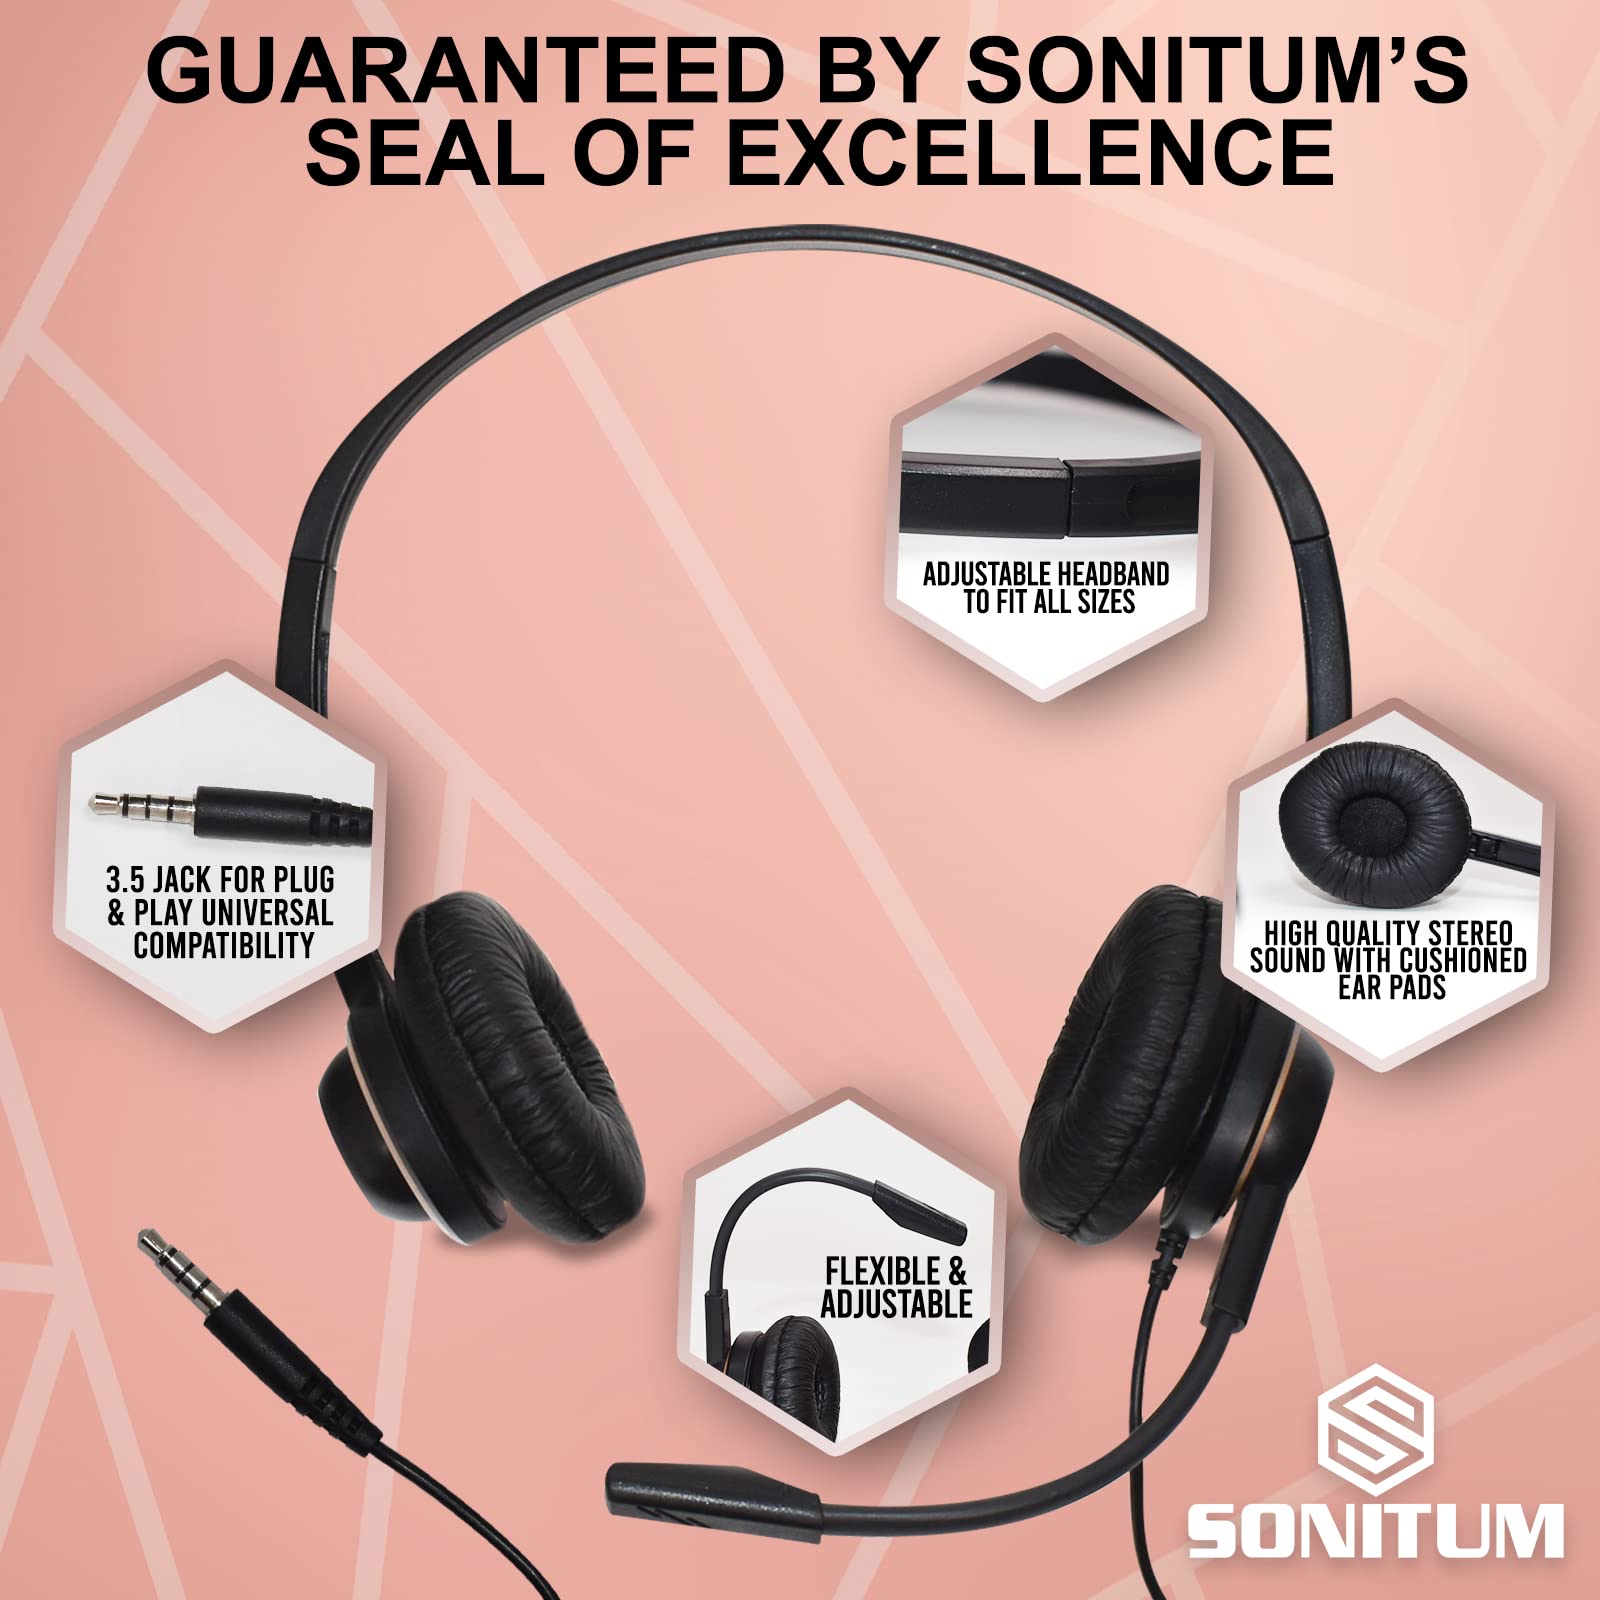 Sonitum Headset with Microphone - Noise Canceling Computer Headset for Office, Meetings, Chat- Comfortable Over-Ear PC Headphones with Rotating Mic- 3.5 Jack for Universal Connectivity (1 Pack)  - Like New